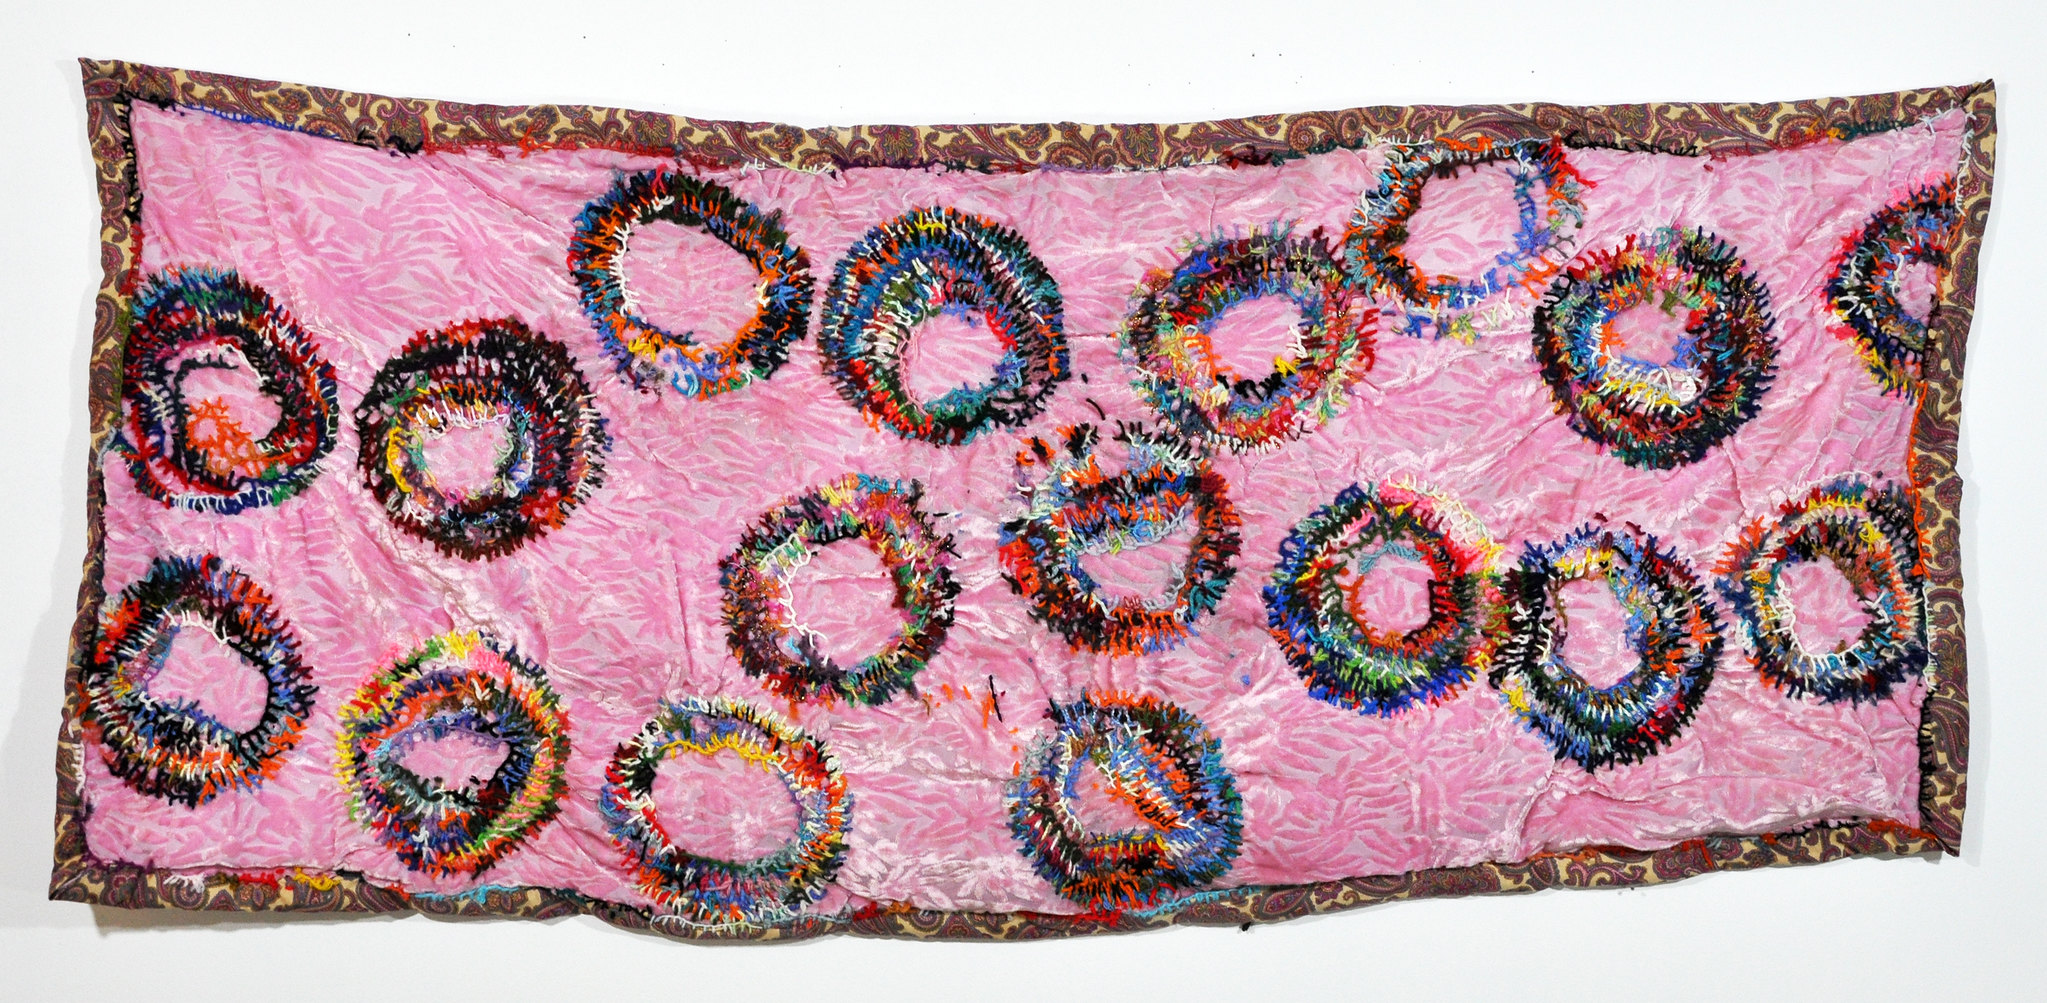 Large pink quilt with circles of sewn very colorful yarn.